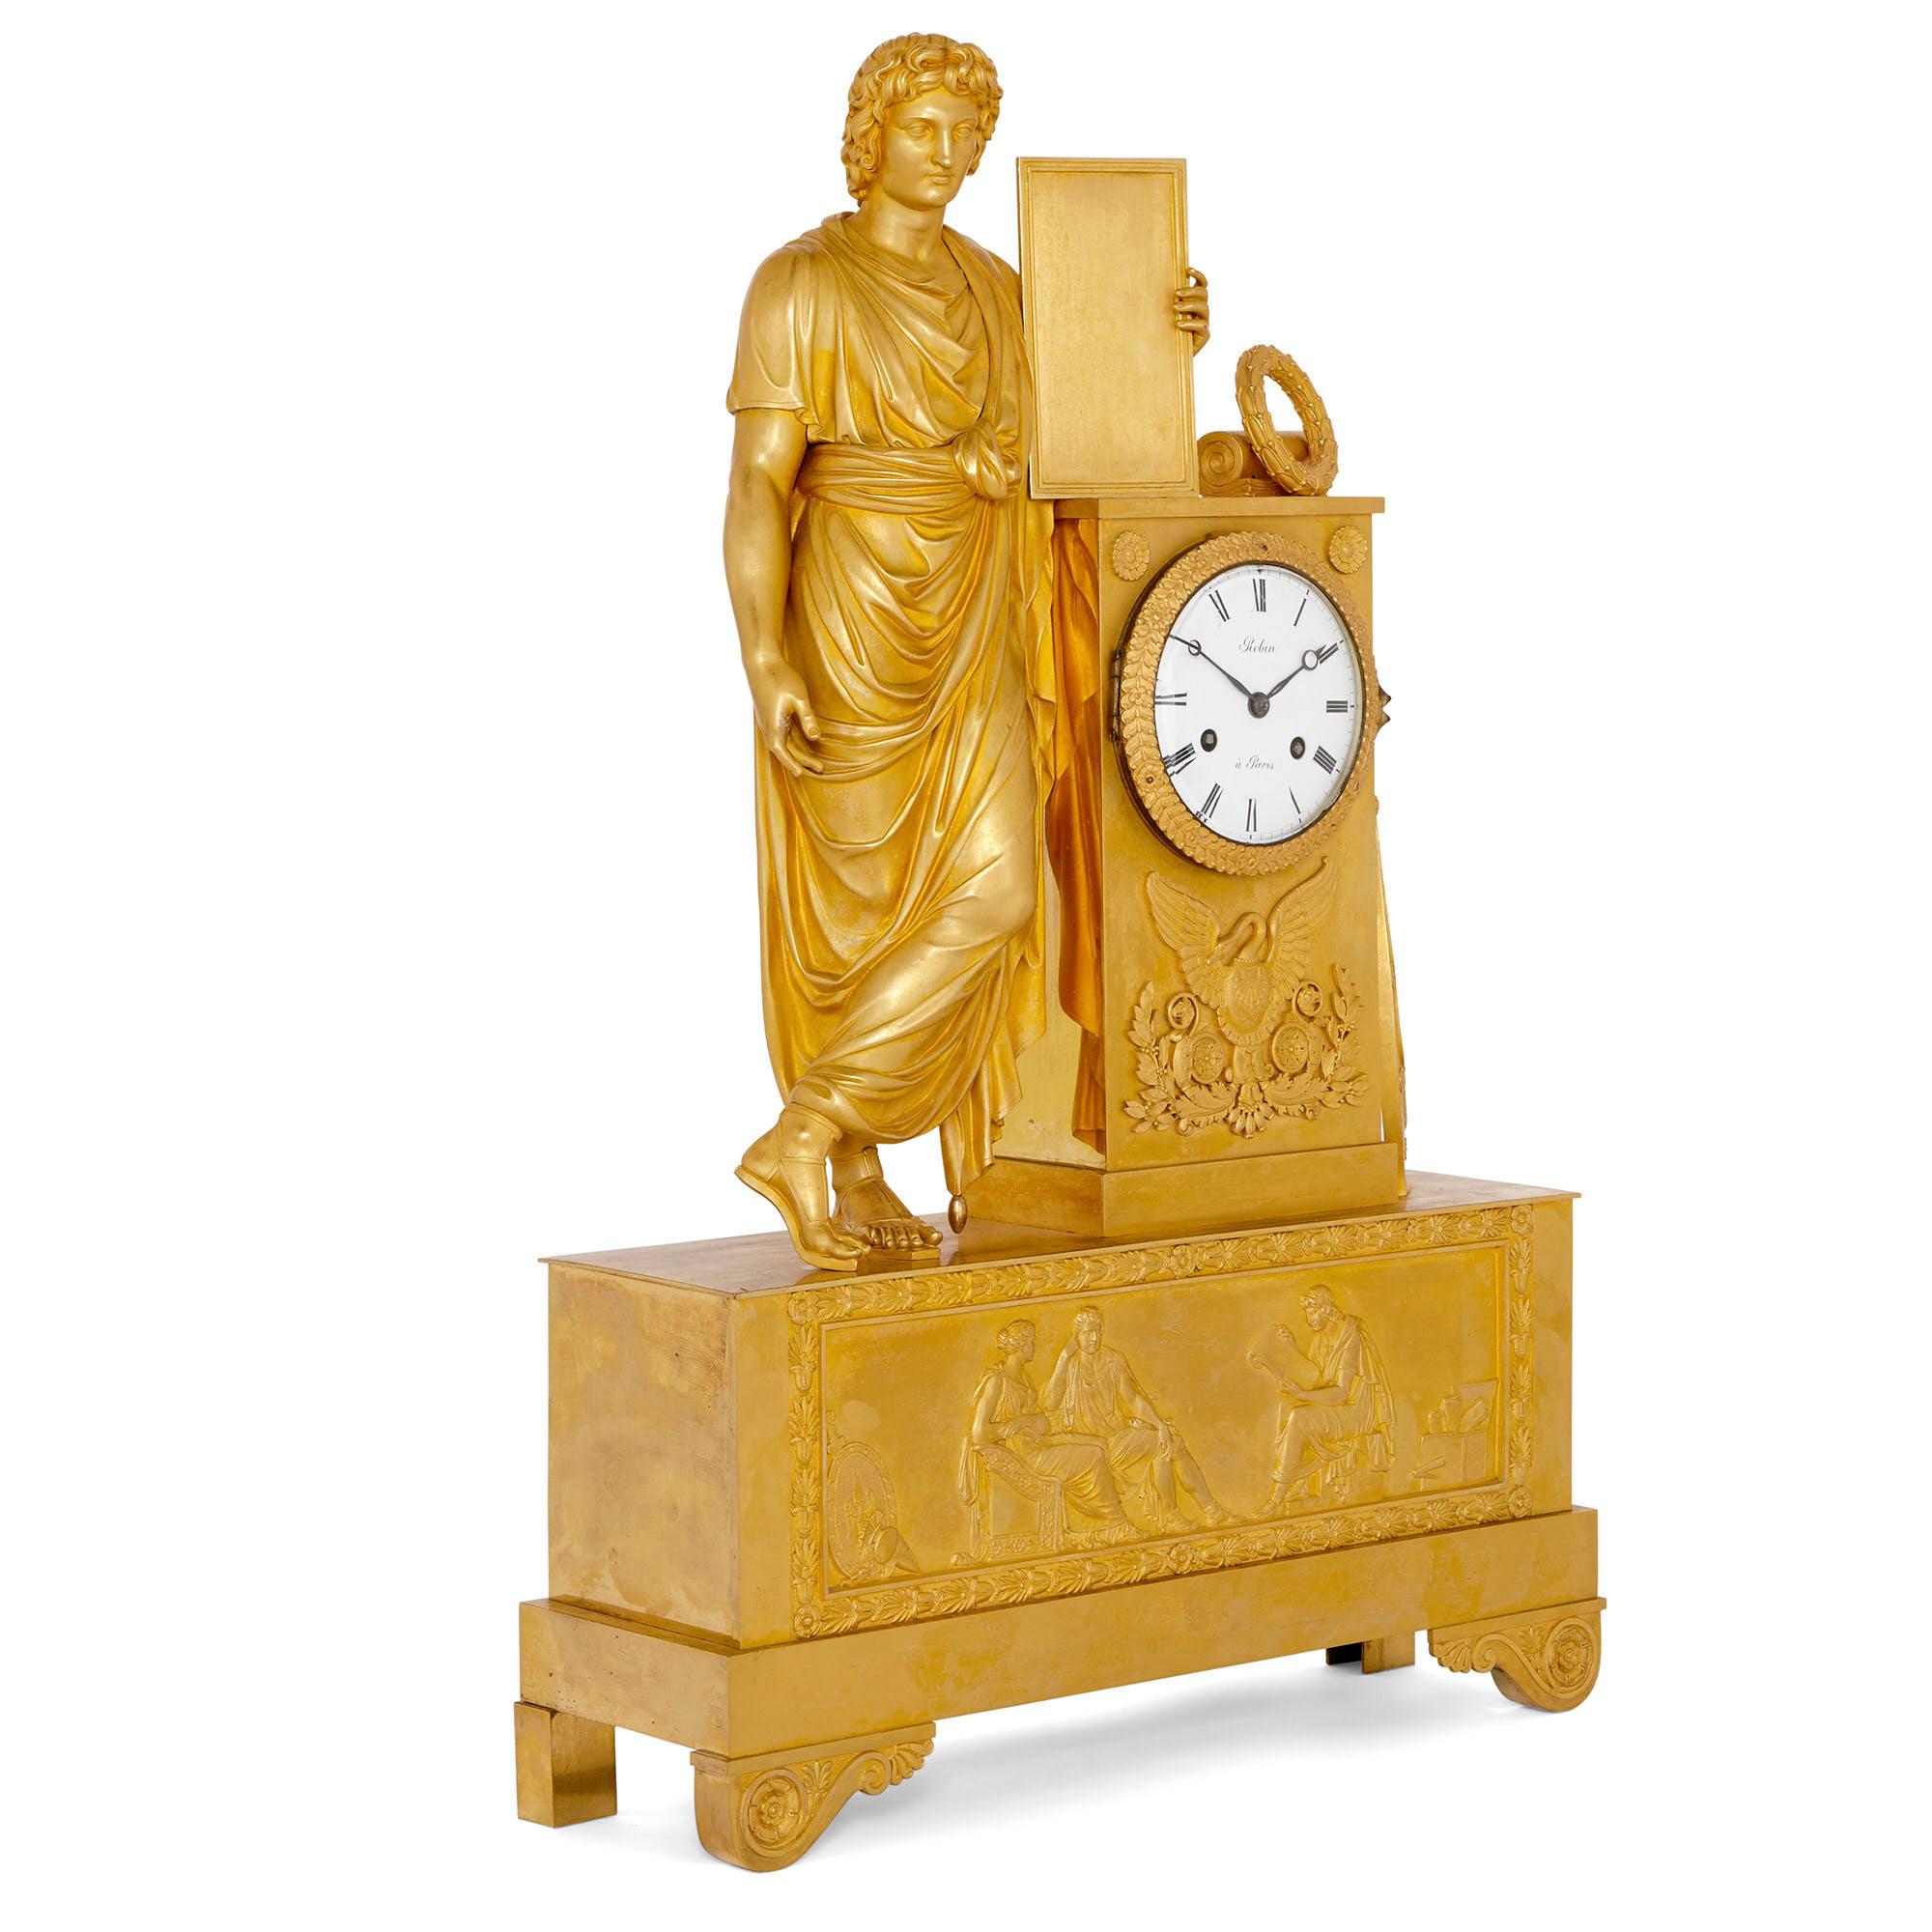 This ormolu (gilt bronze) mantel clock is a stunning piece of design, which features beautiful neoclassical style low-relief decorations and three-dimensional sculptures. 

The clock takes the form of a tall rectangular case with a circular white